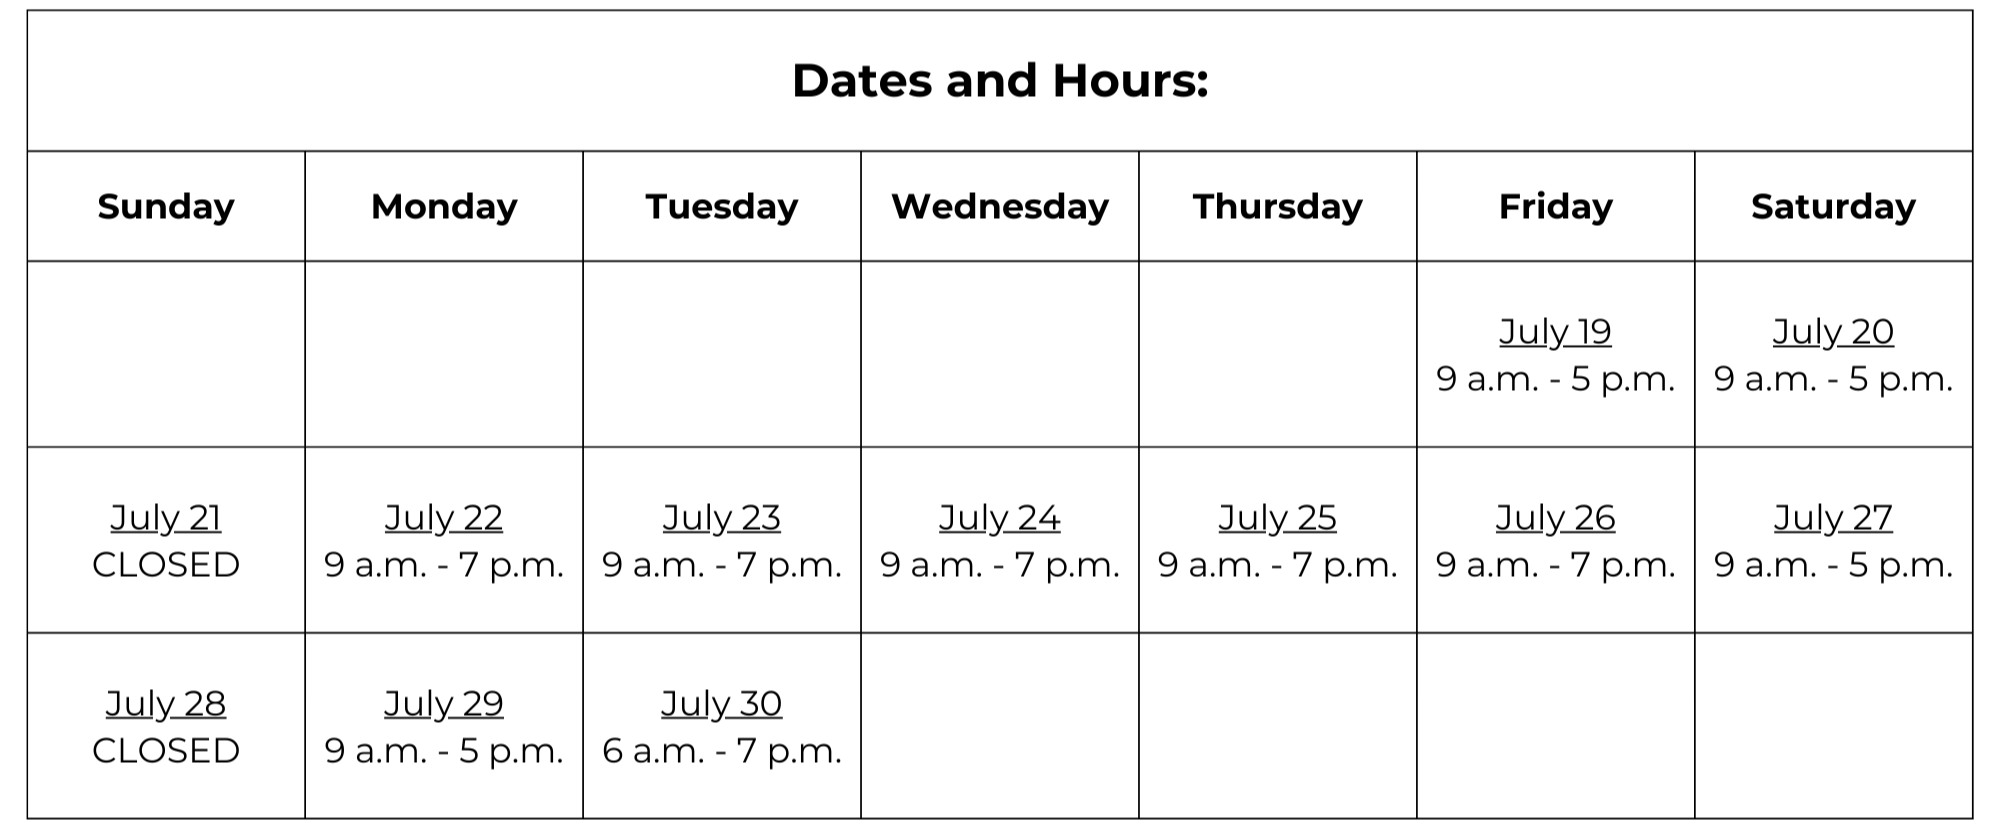 Picture of July Election Polling Location Dates and Hours